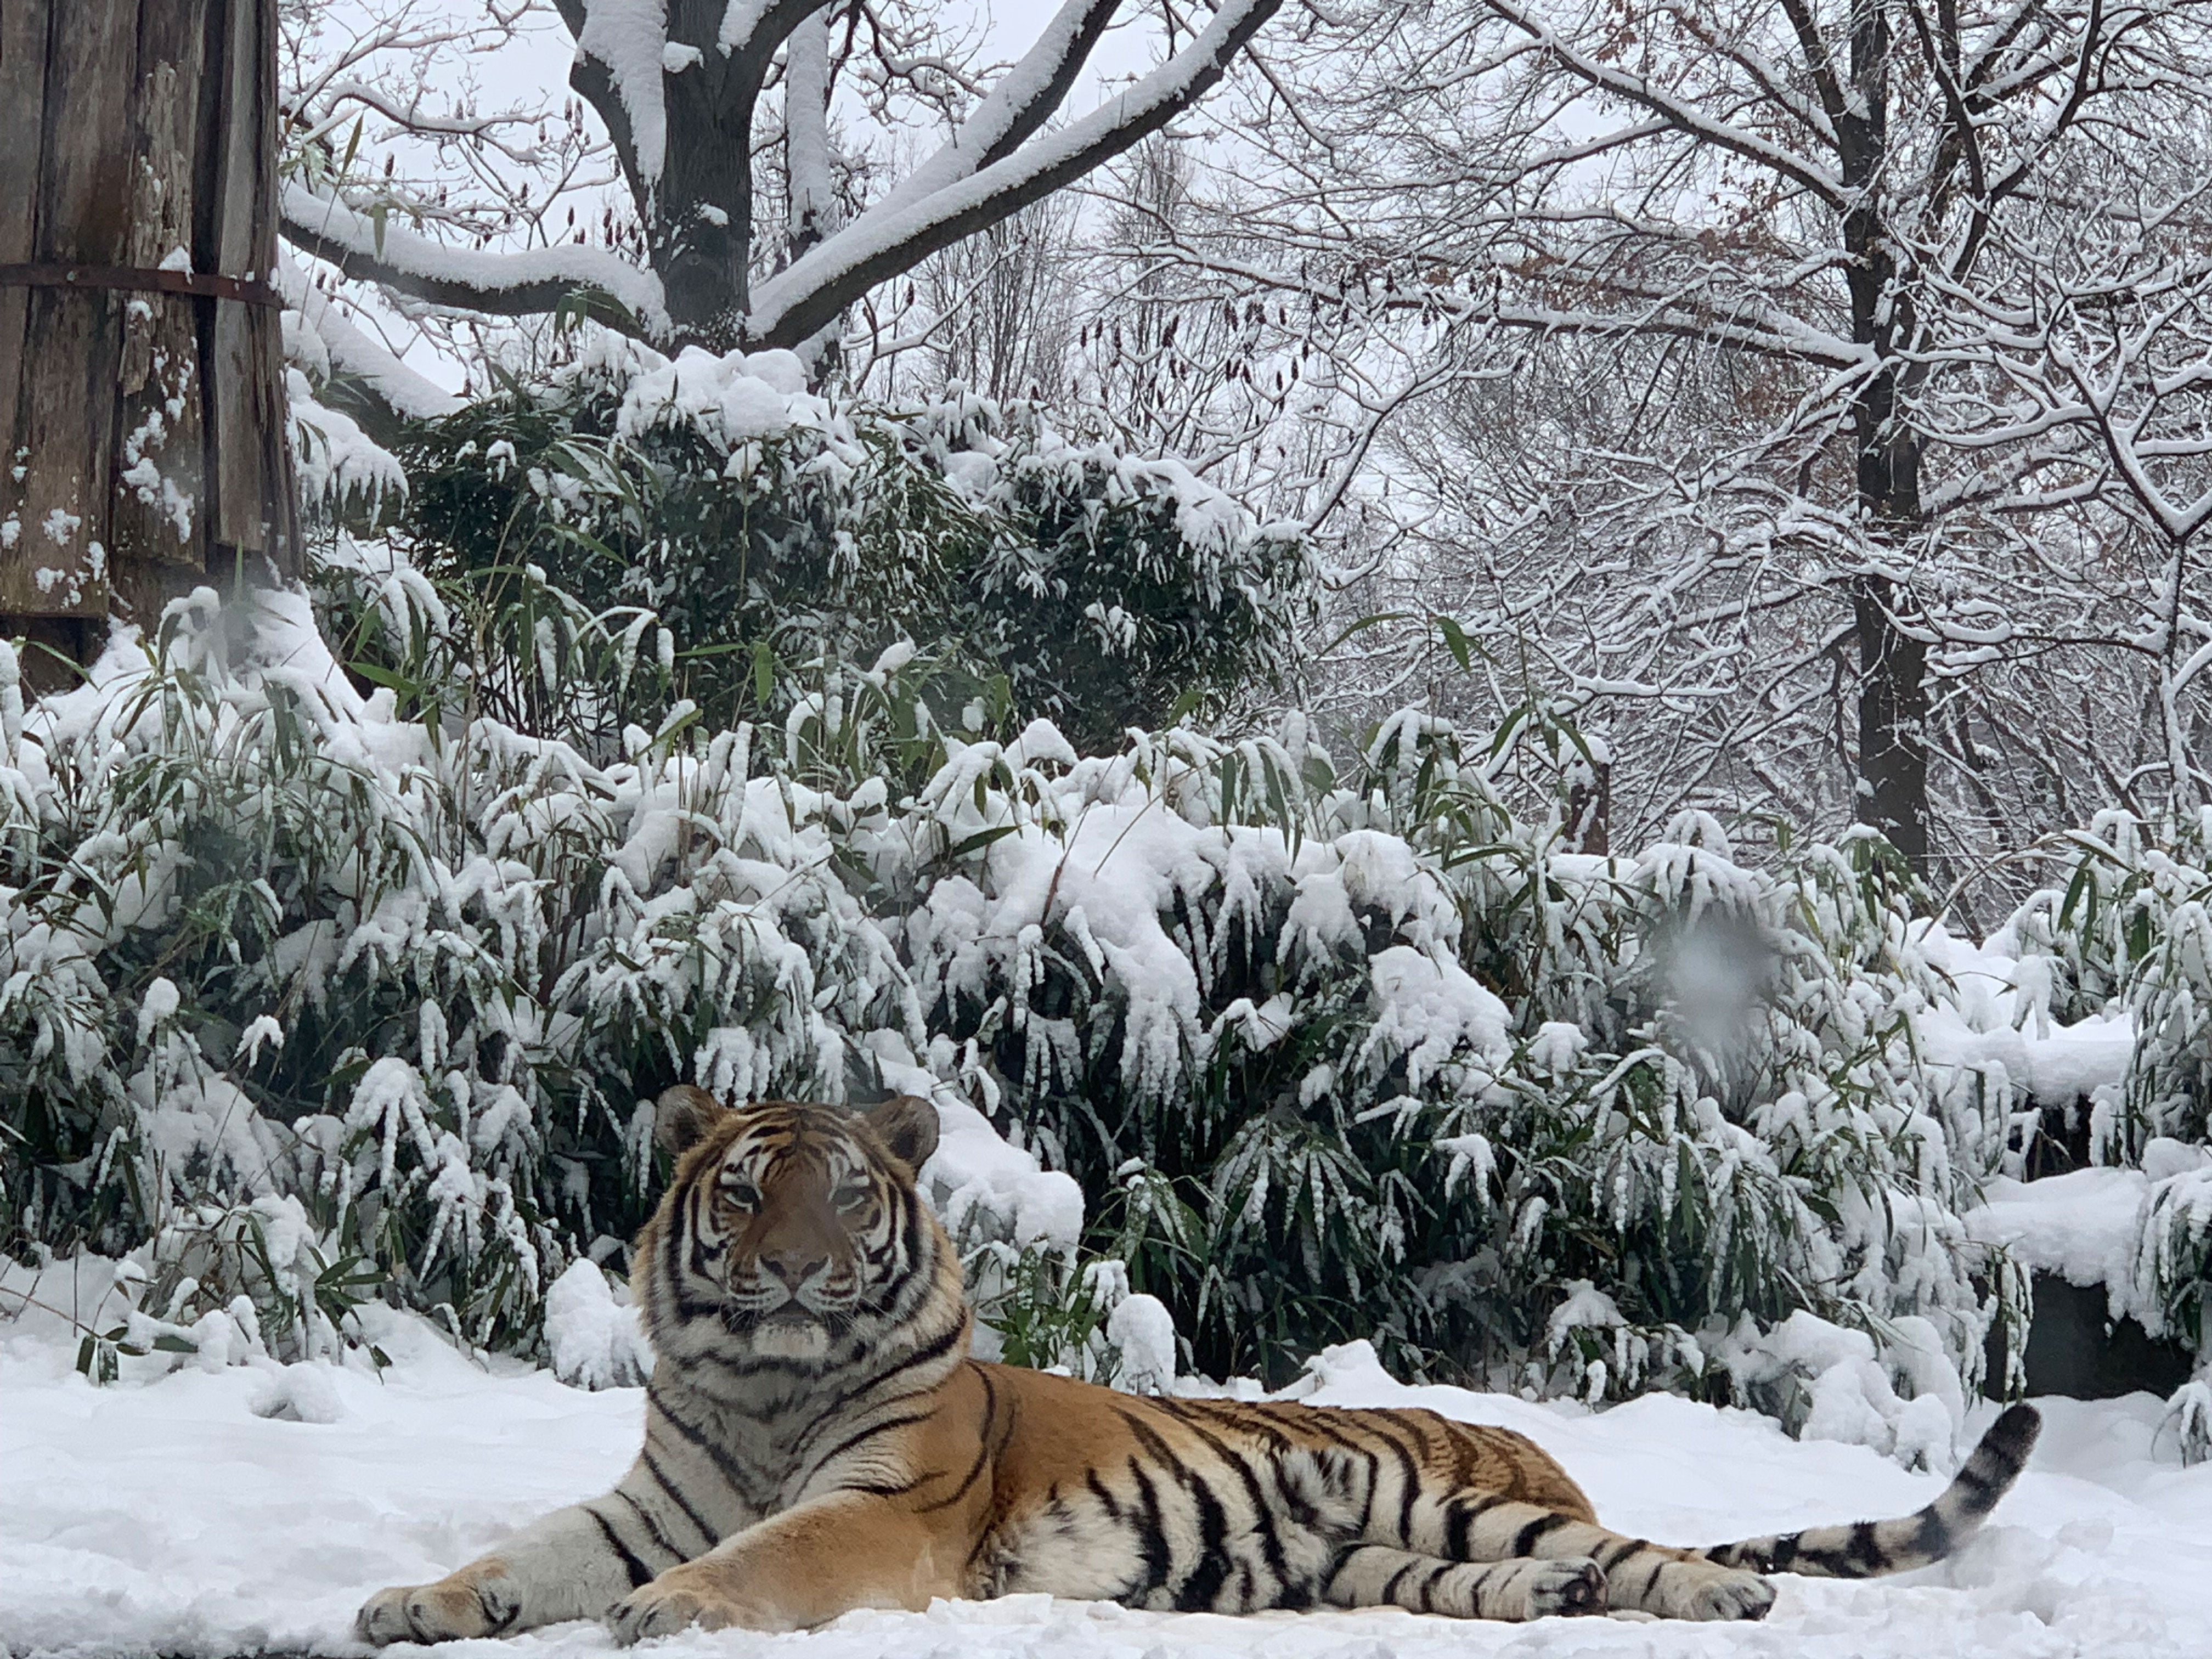 Amur tiger Pavel rests in snow at the Smithsonian's National Zoo